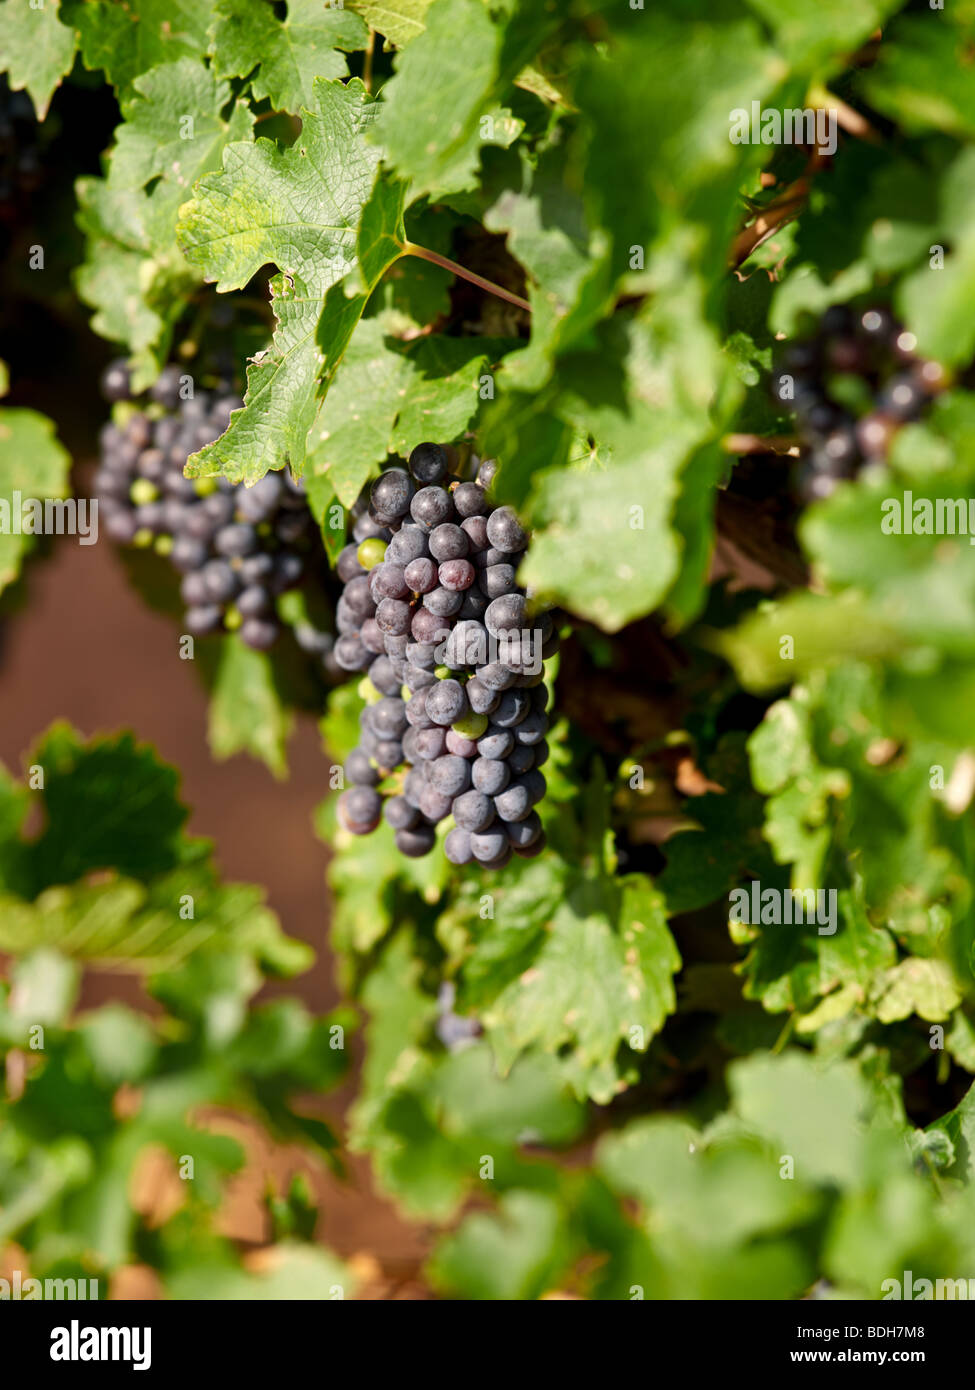 Clusters of ready to harvest merlot grapes on the vine at Newsom Vineyards in Yoakum County, Texas,USA Stock Photo